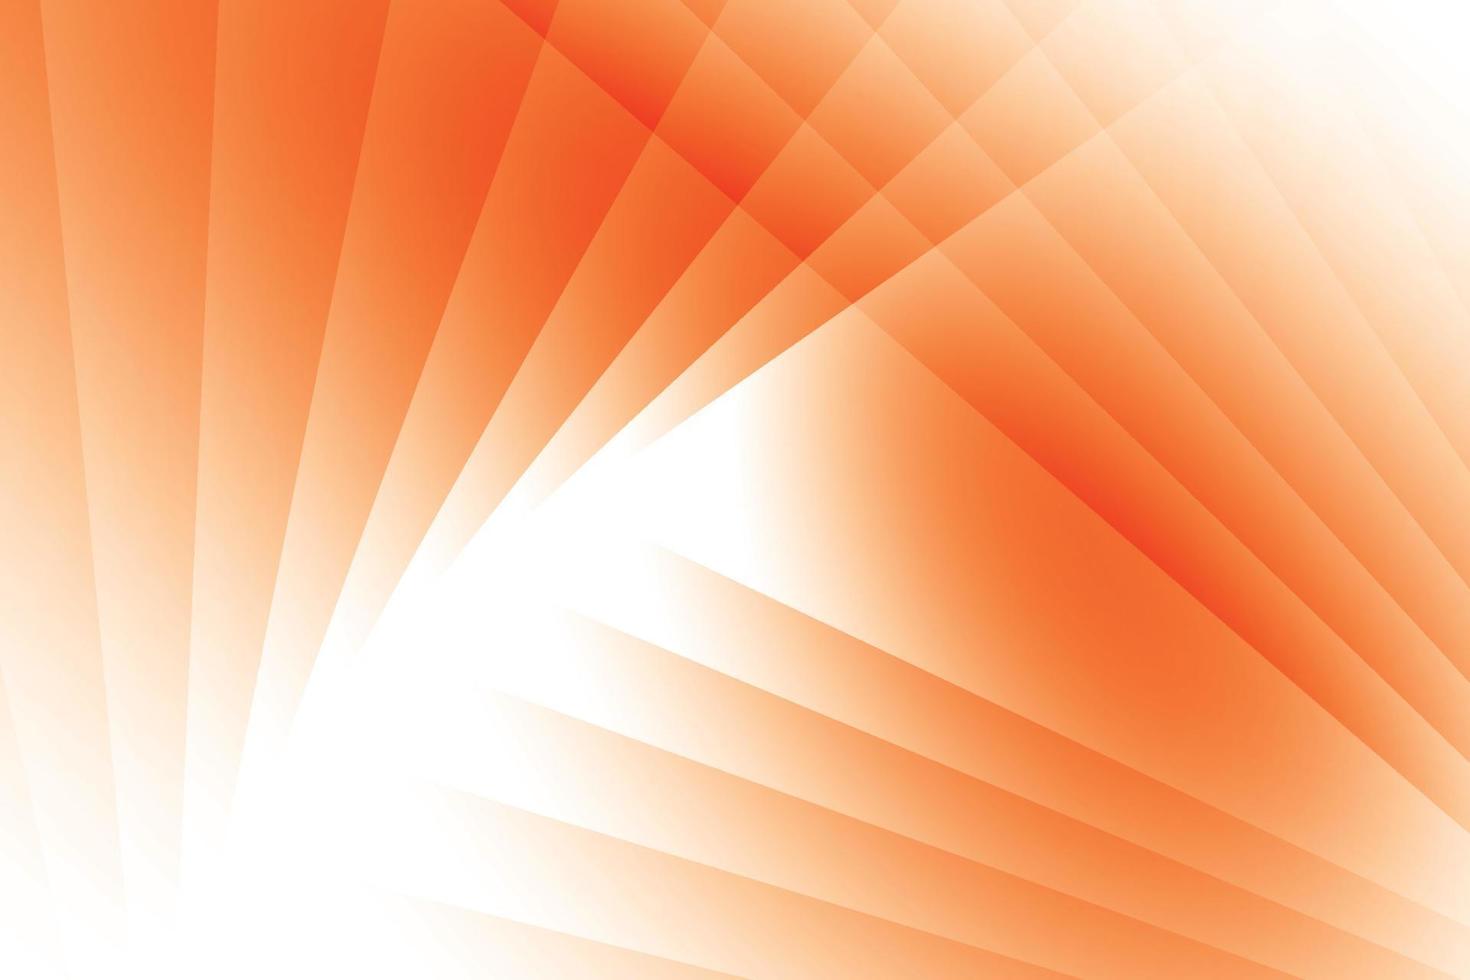 Abstract orange and white color background with geometric triangle shape. Vector illustration.